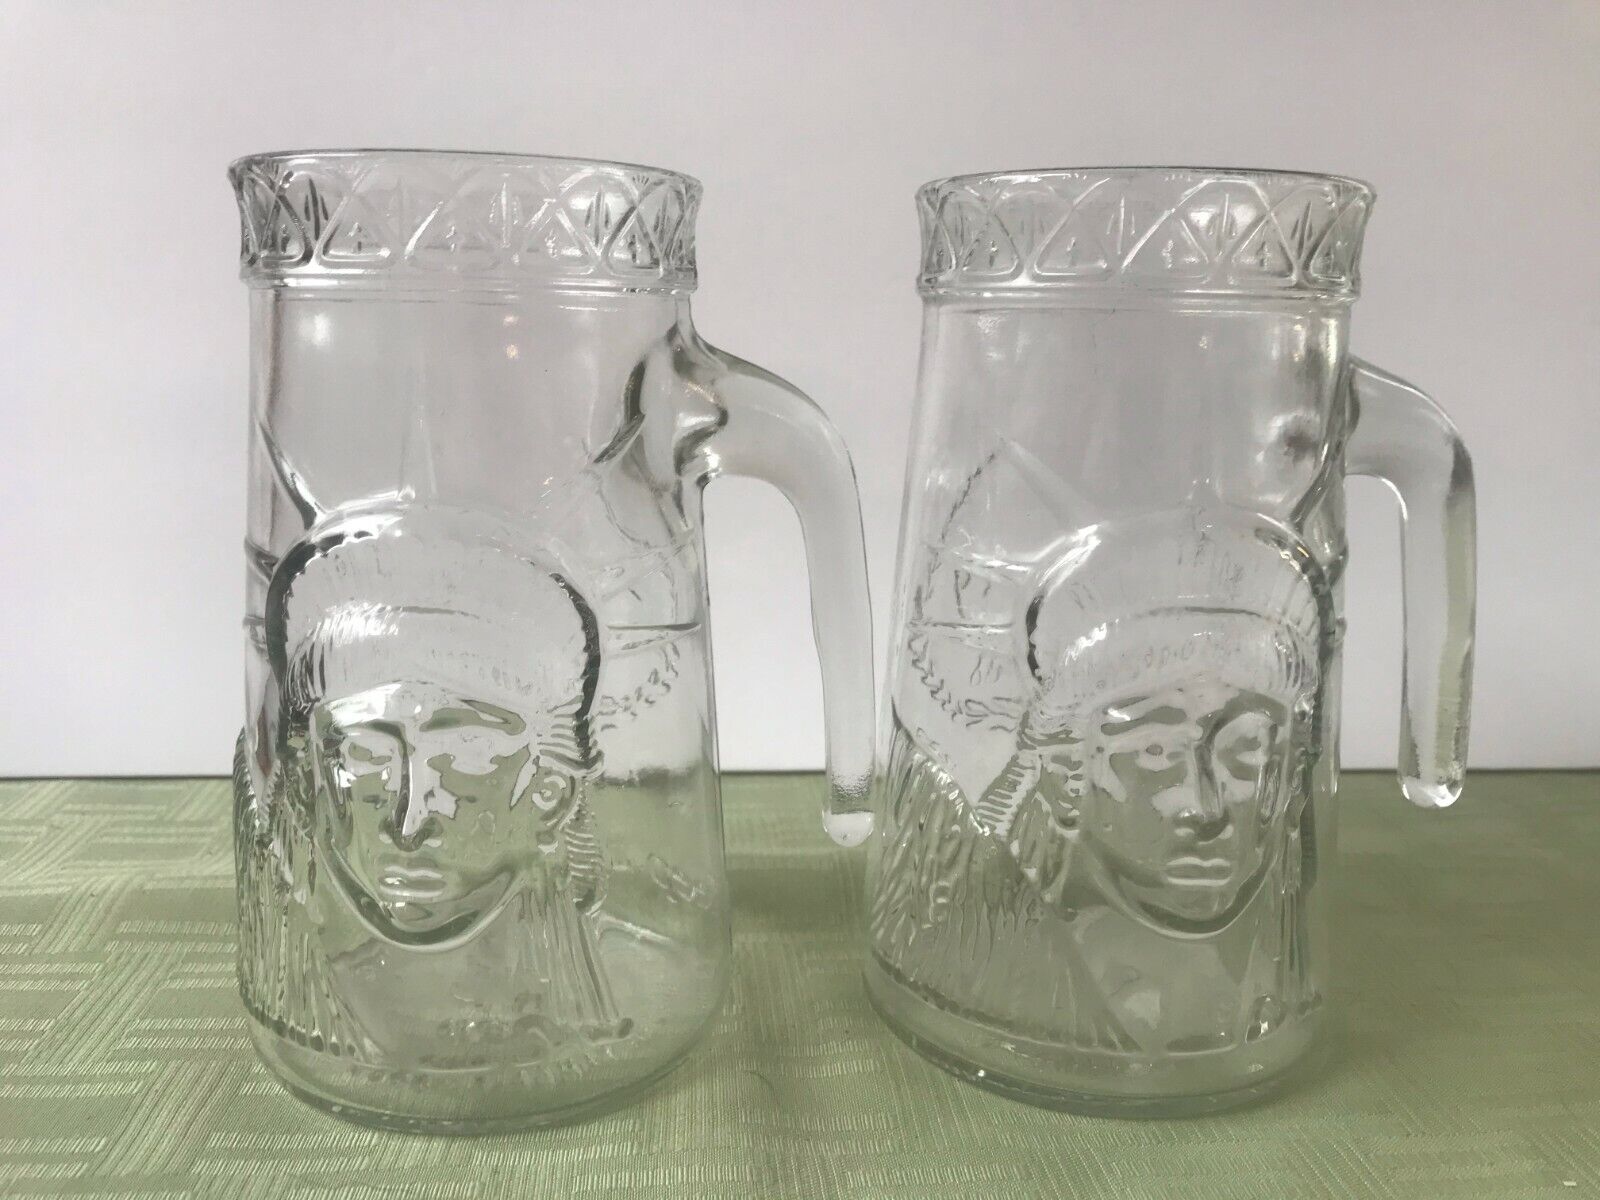 2 STATUE OF LIBERTY 1886-1986 CENTENNIAL CUP/MUGS Anchor Glass Tampa FL Vintage